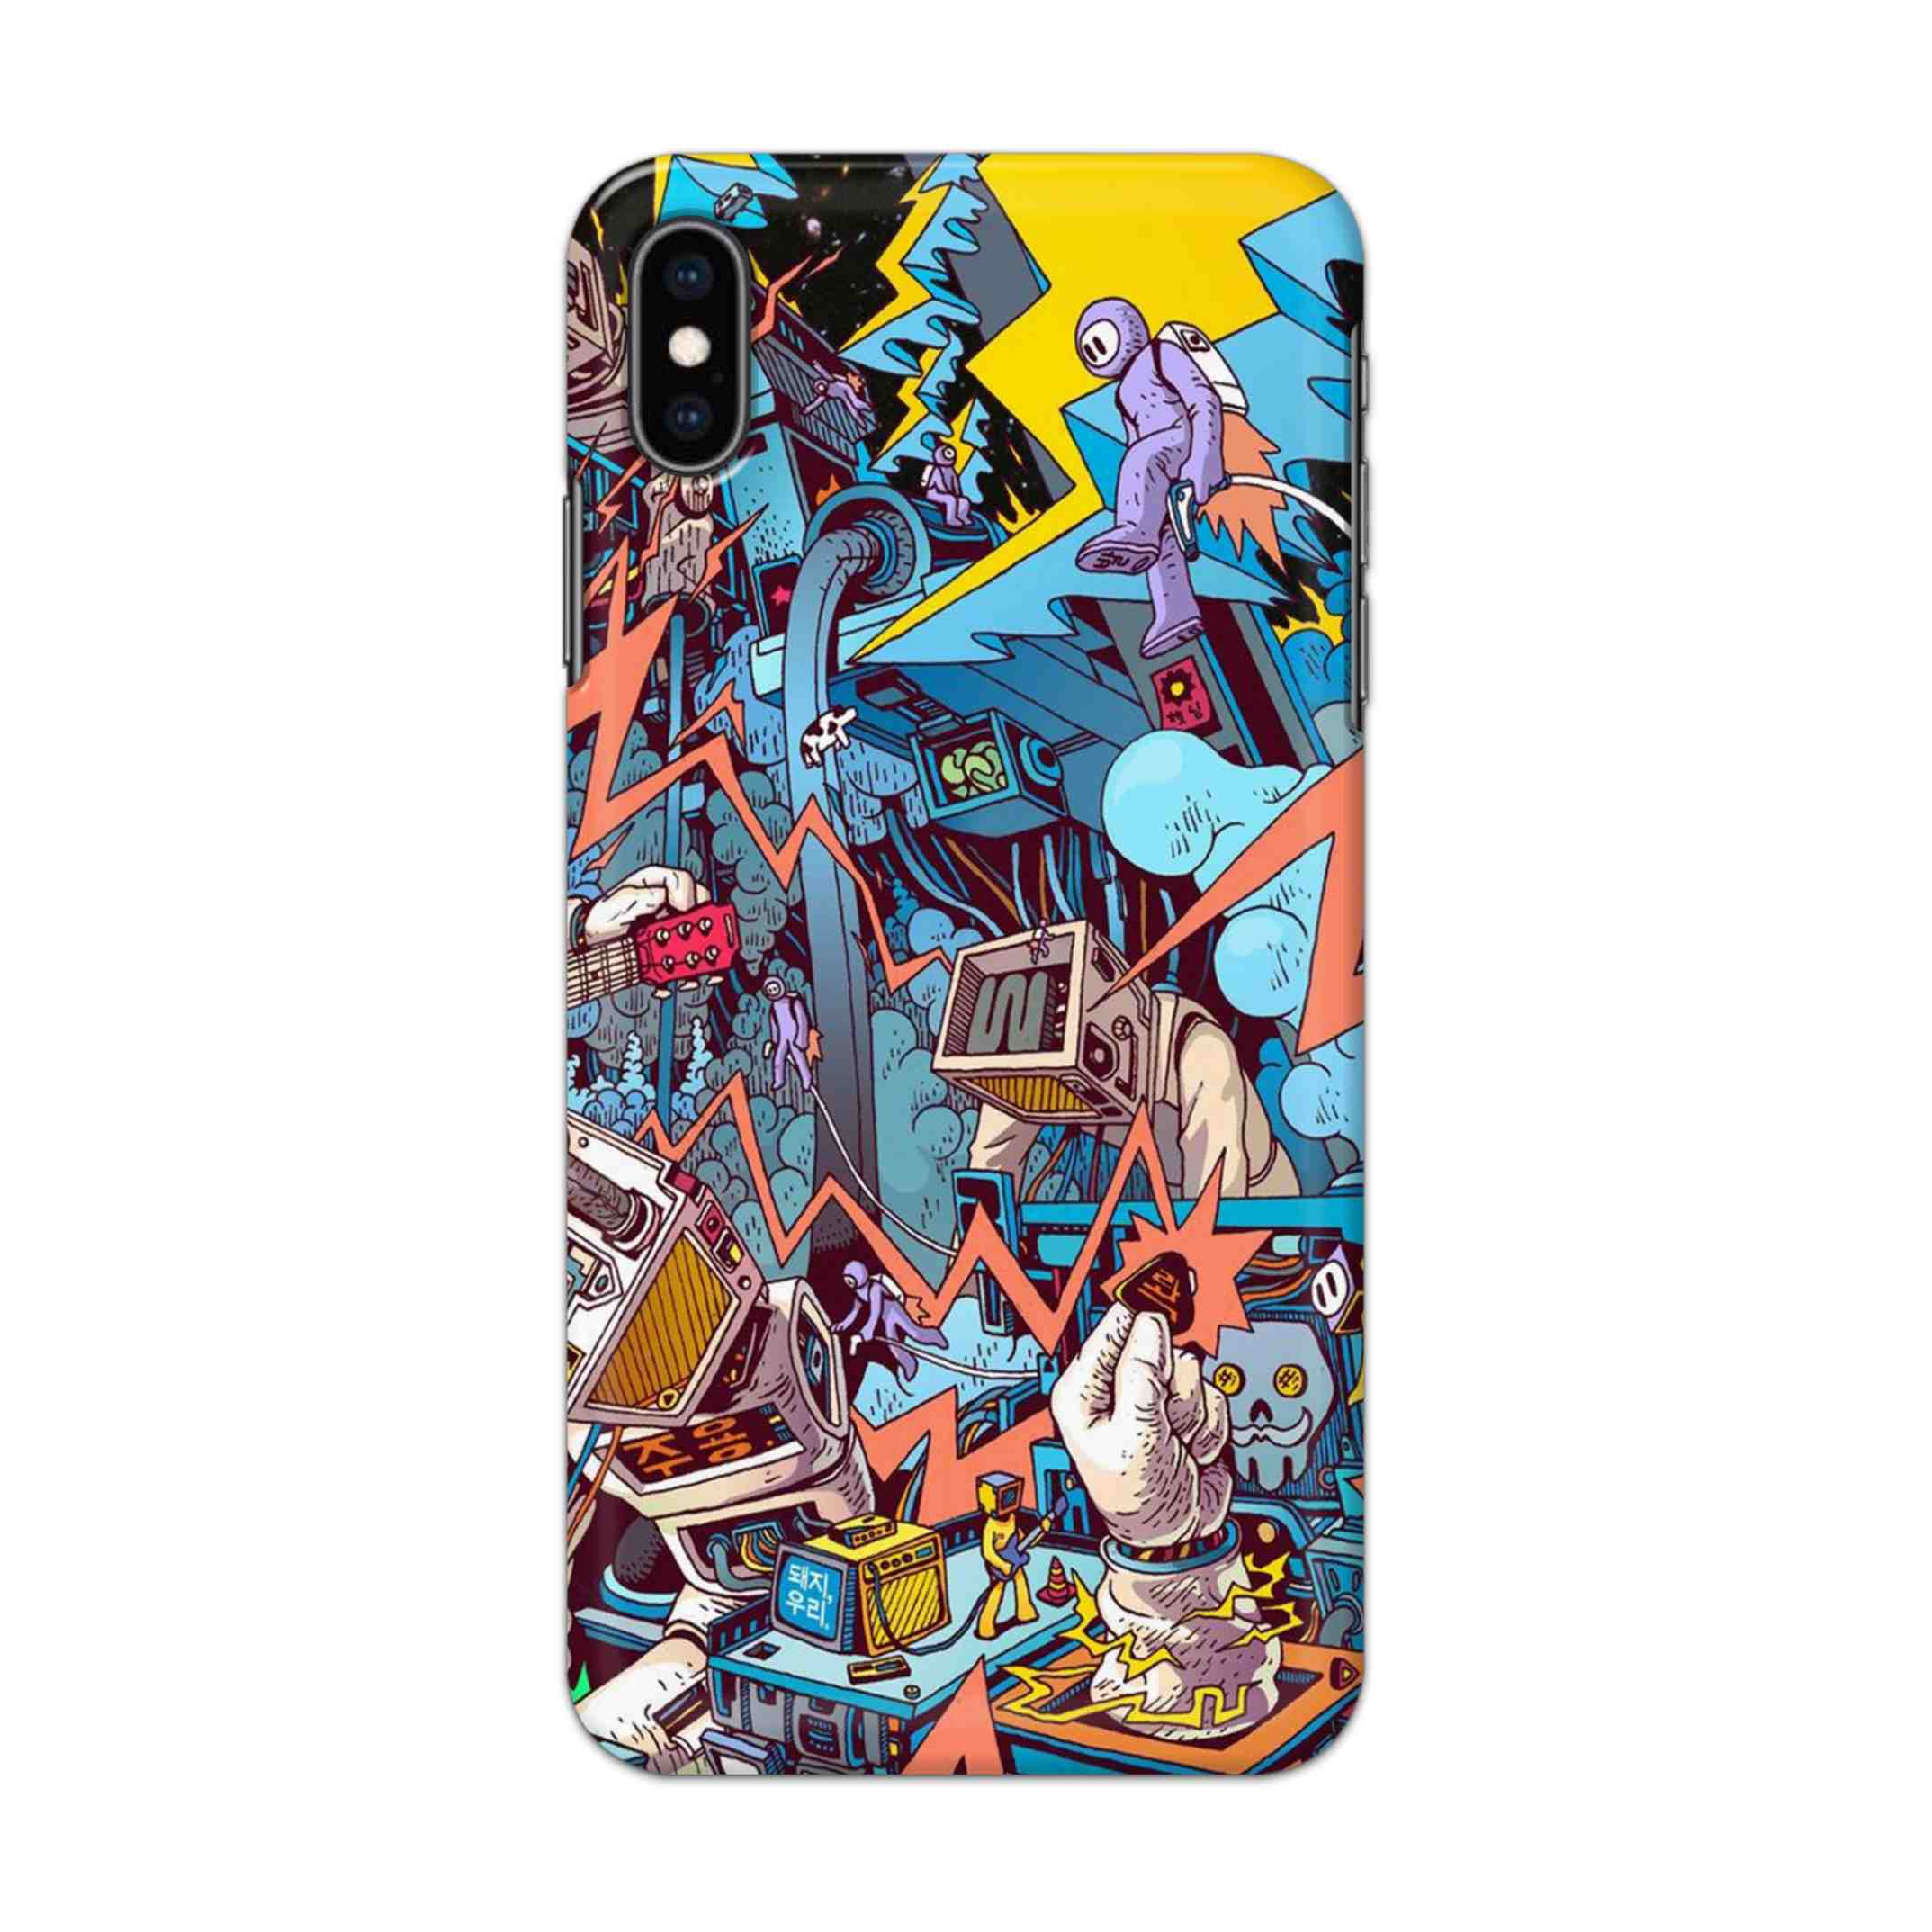 Buy Ofo Panic Hard Back Mobile Phone Case/Cover For iPhone XS MAX Online